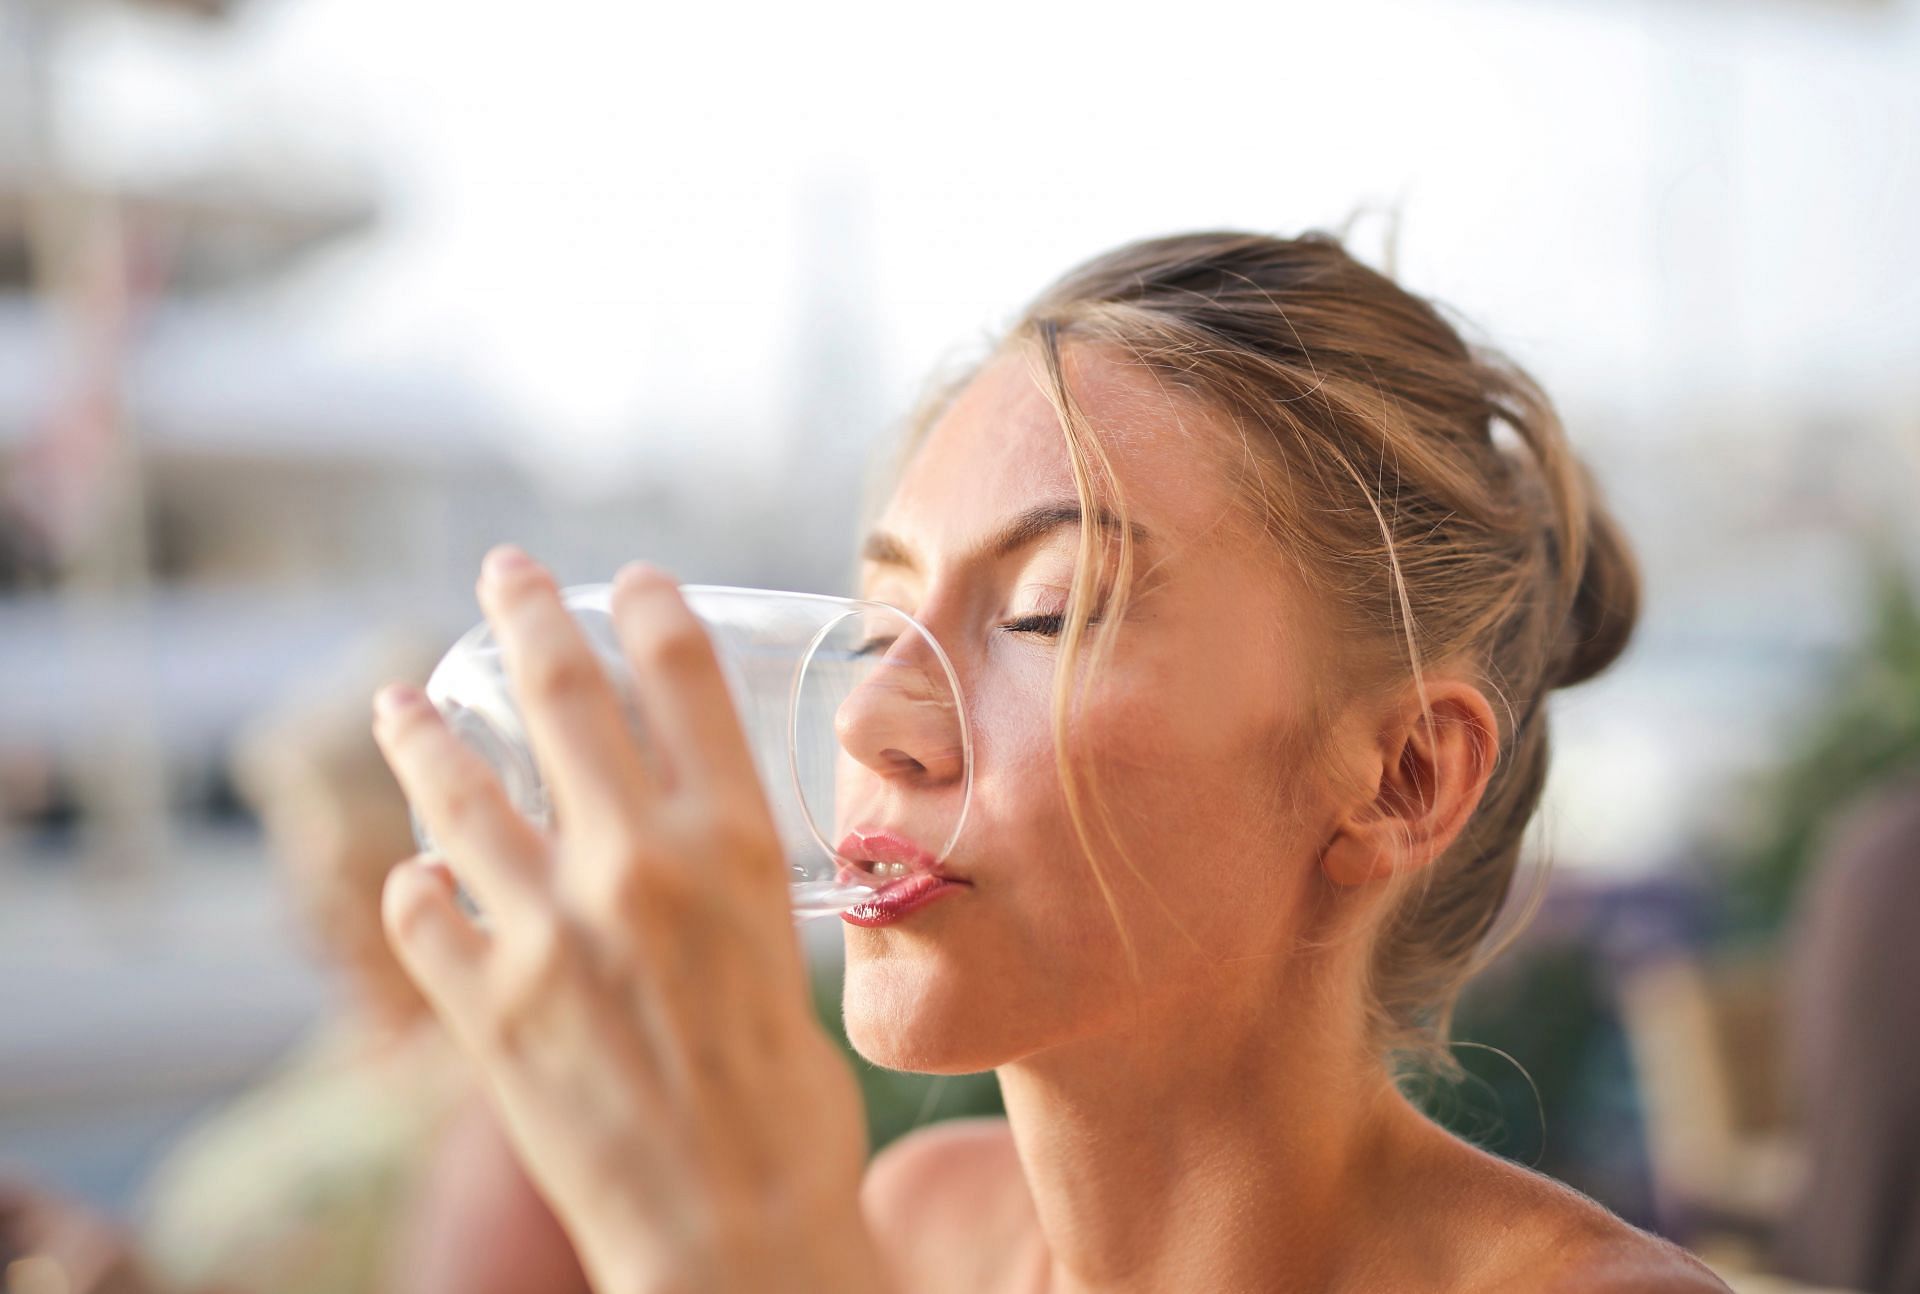 Drink water while eating (image sourced via Pexels / Photo by adrienn)